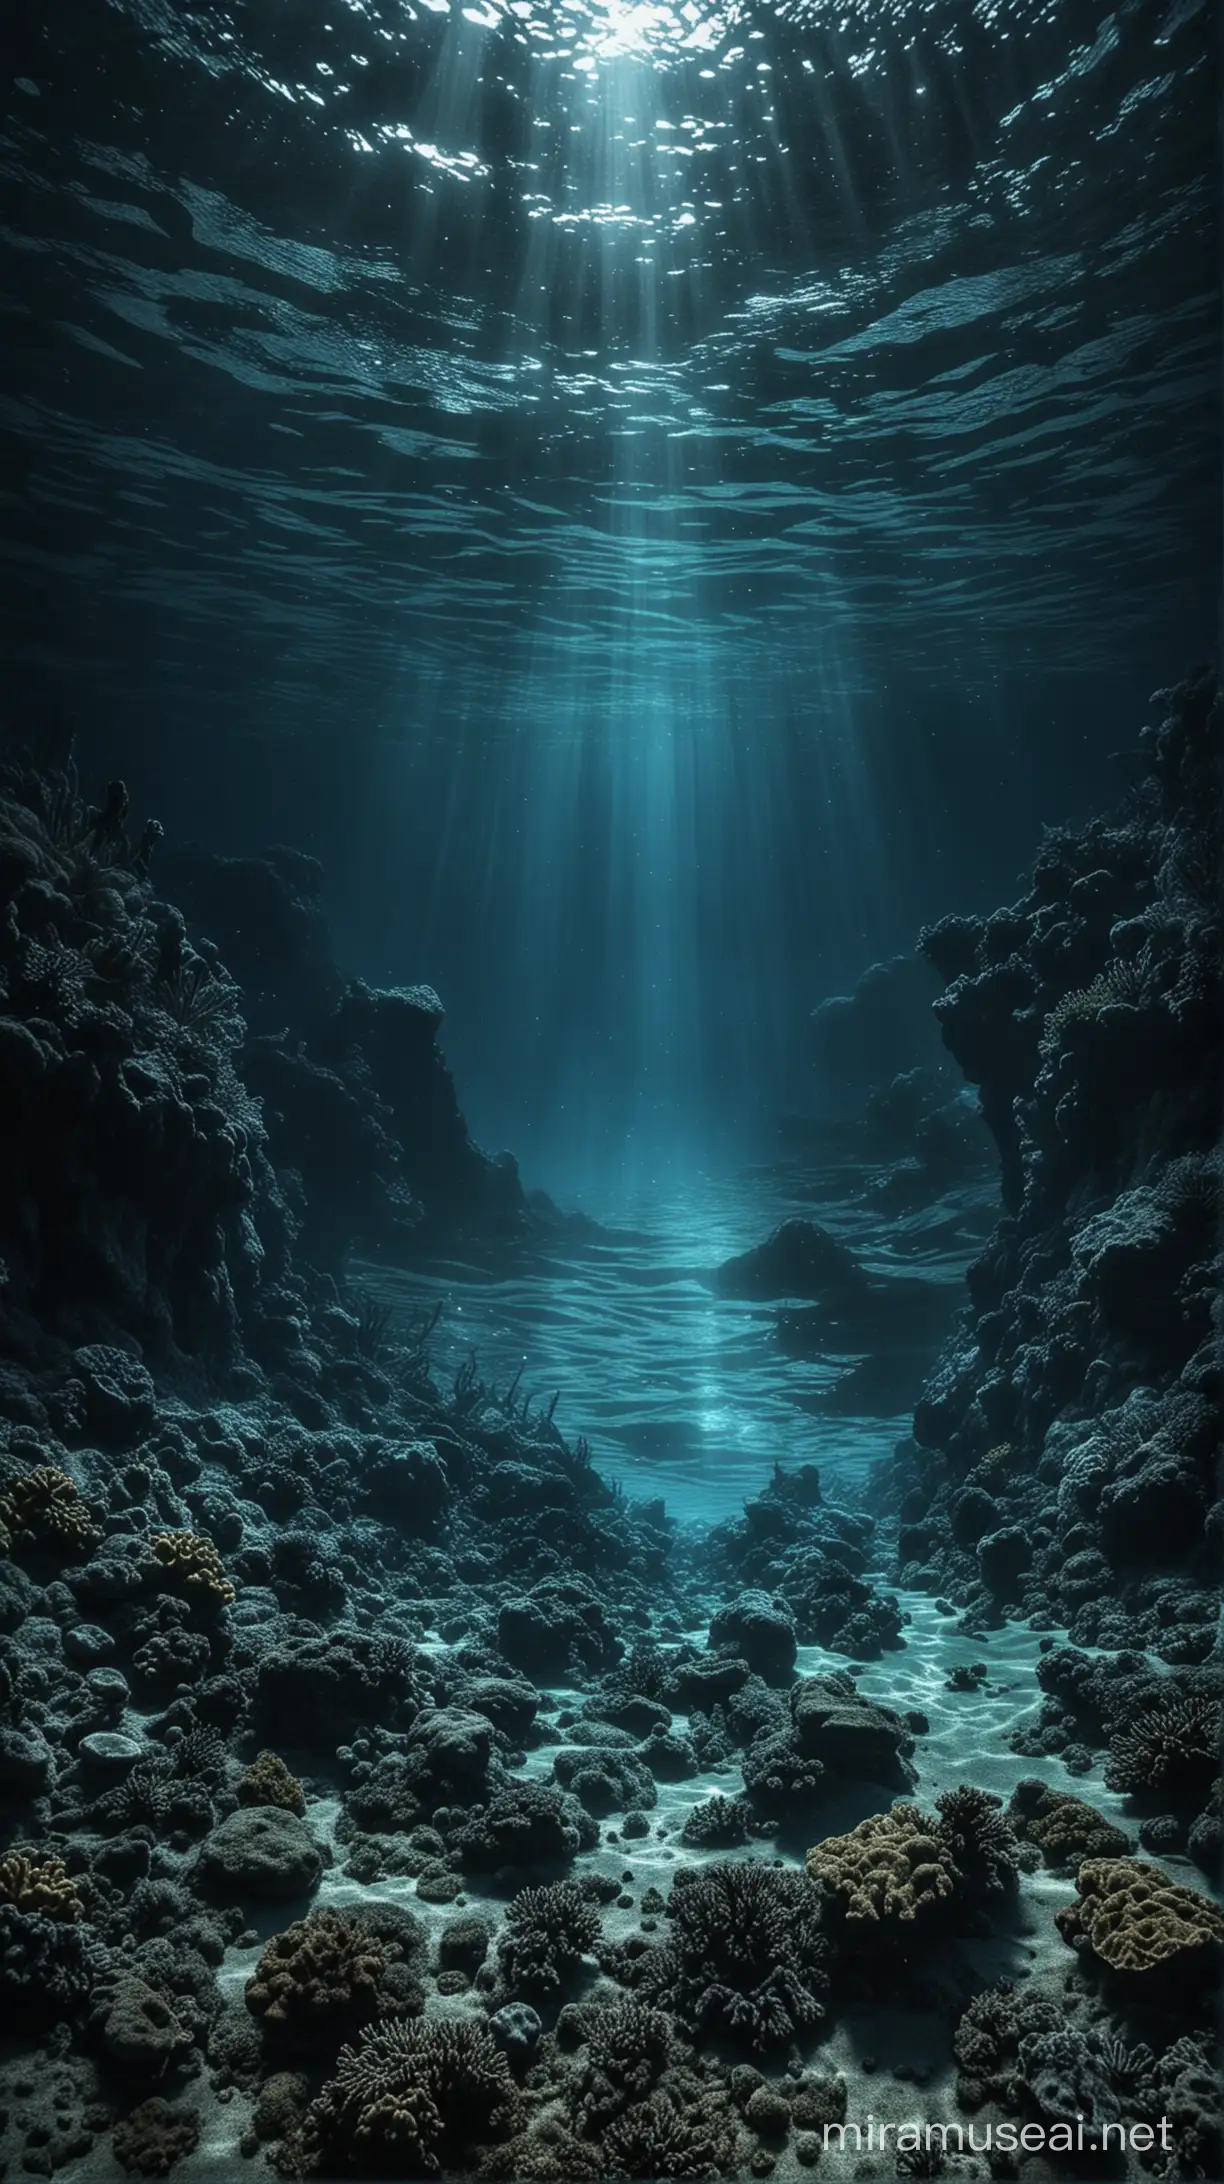 Exploring the Enigmatic Depths of the Dark Blue Sea